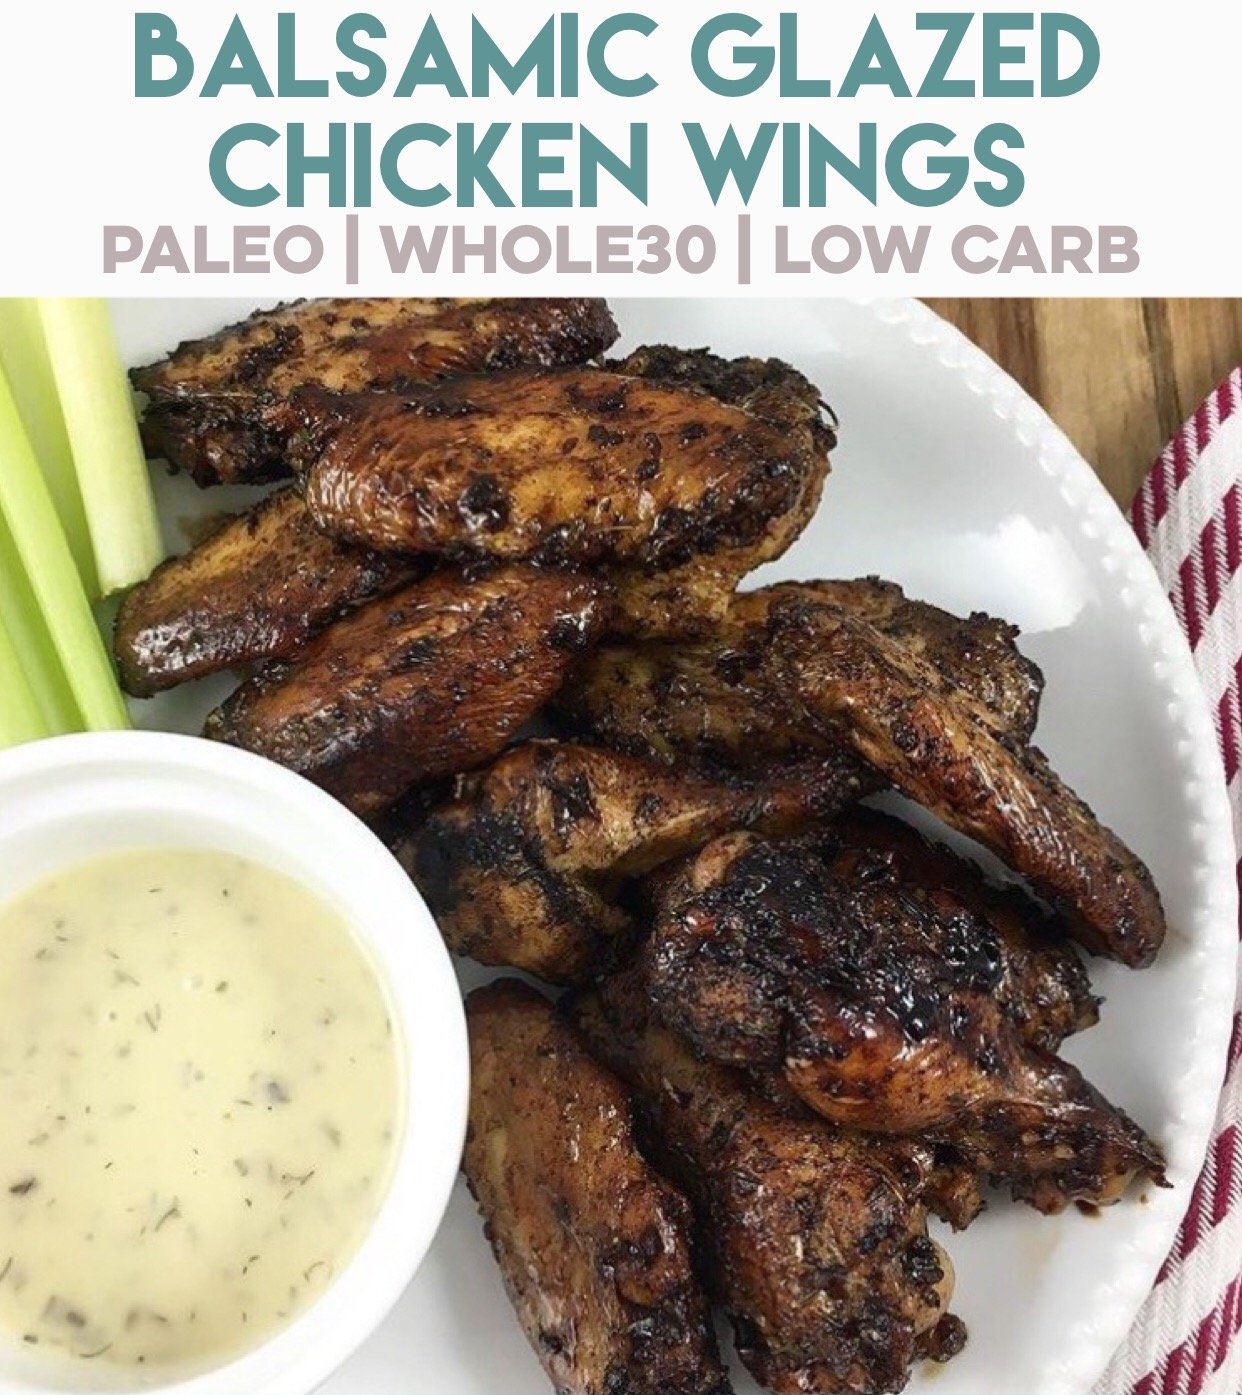 Whole30 and Paleo Balsamic glazed chicken wings with 6 ingredients you already have! #paleochickenwings #paleochicken #chickenwingrecipes